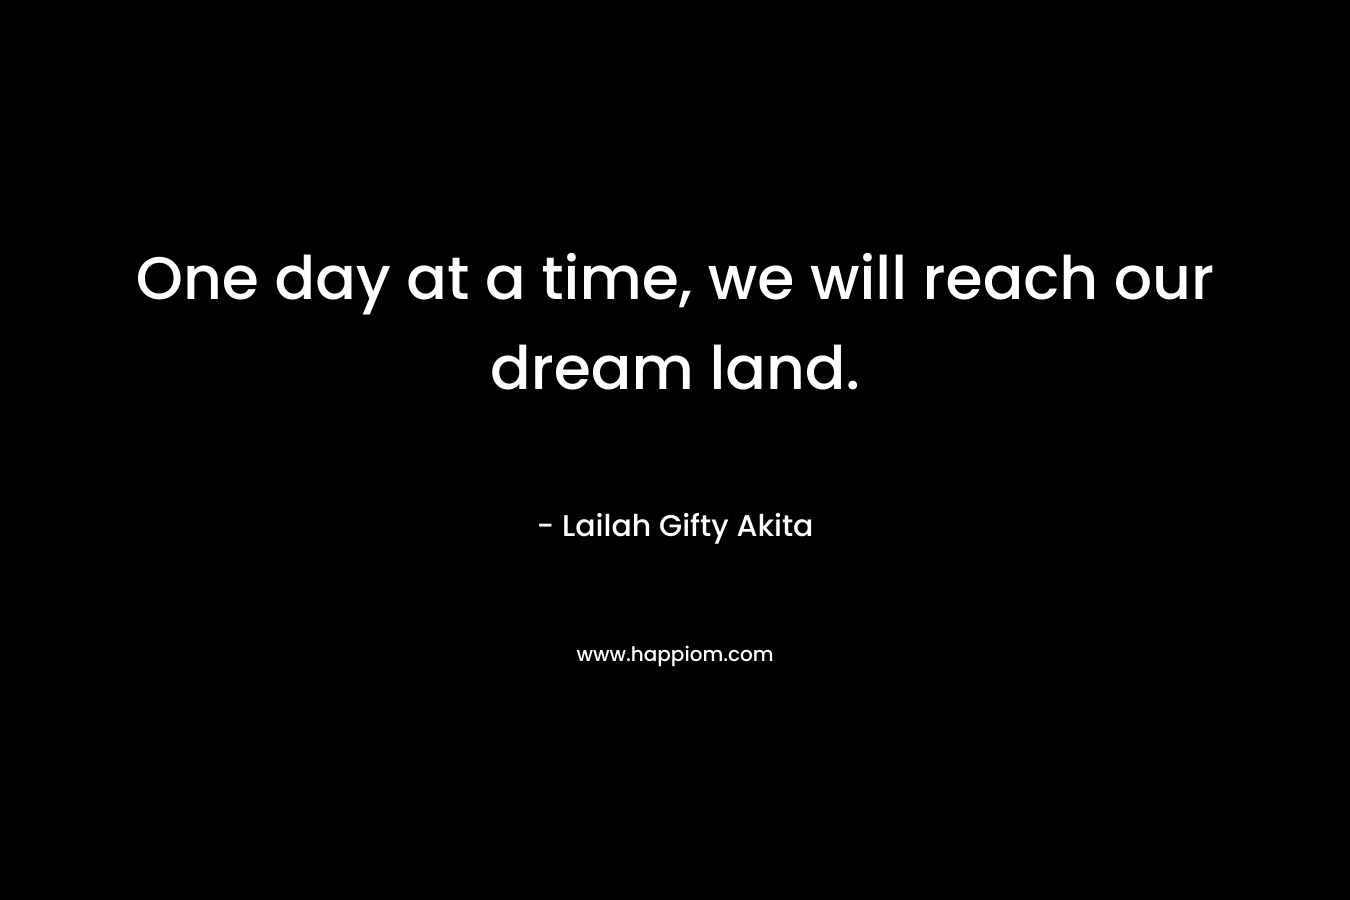 One day at a time, we will reach our dream land.